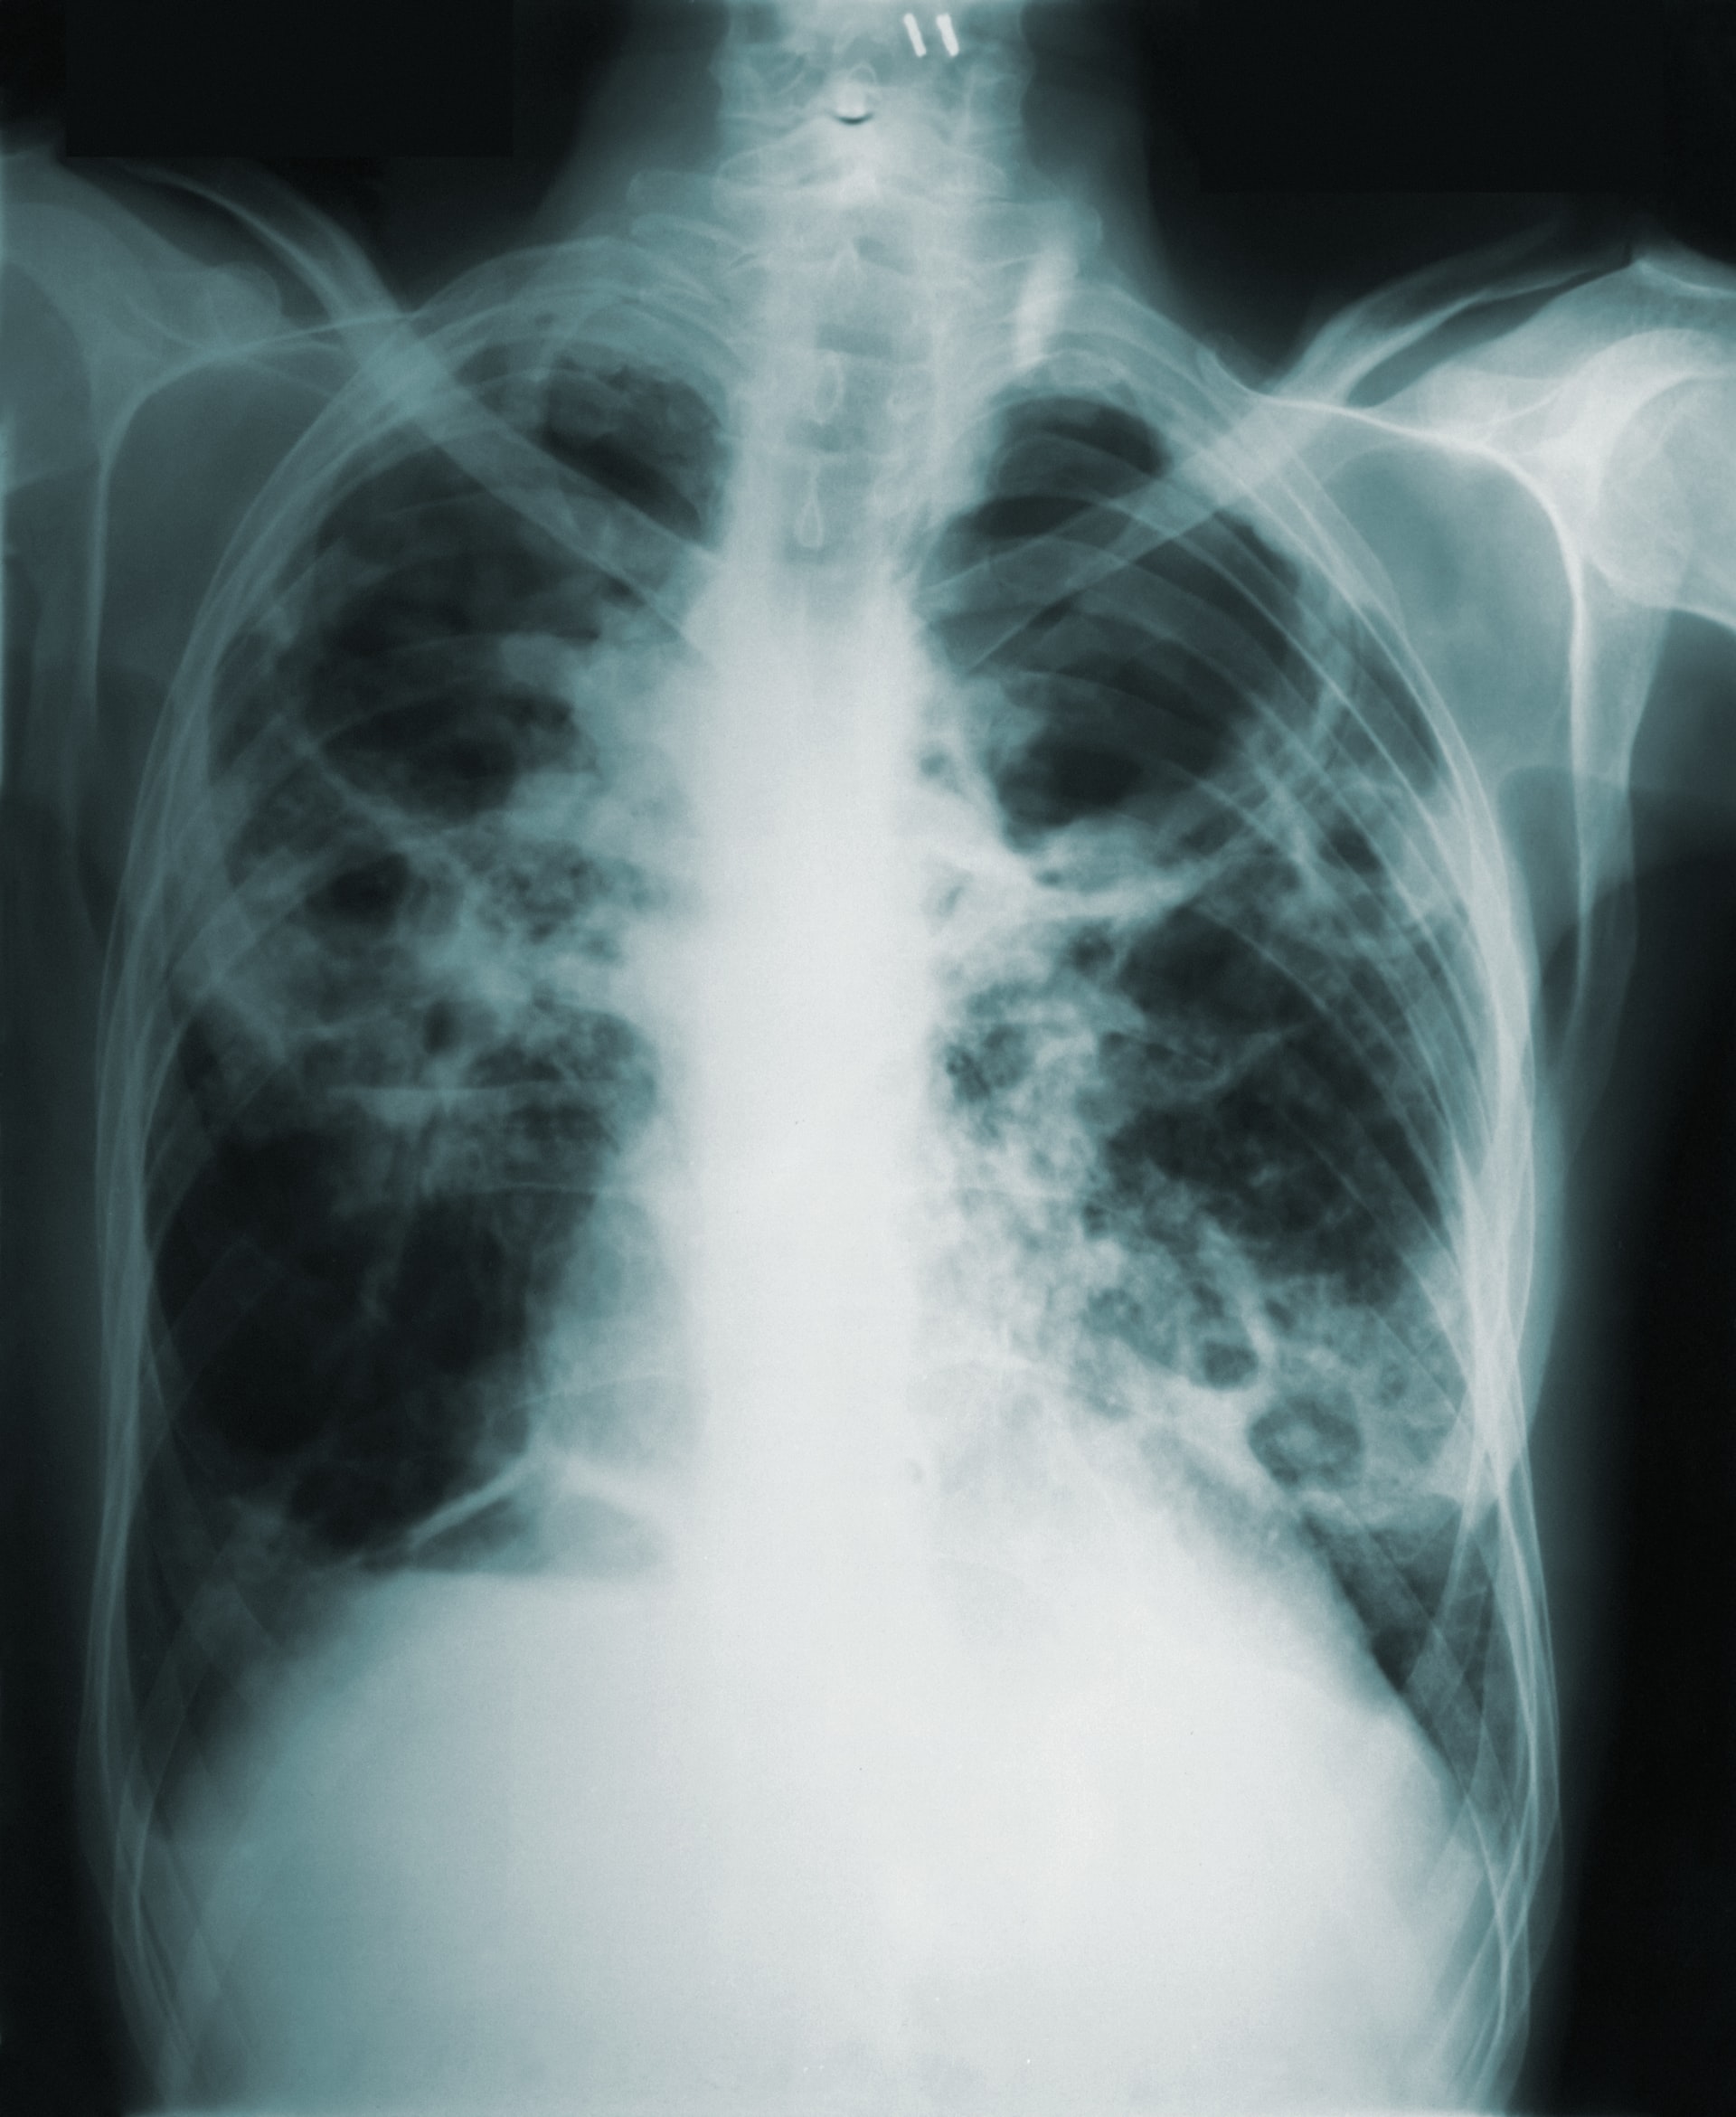 Black and white color x-ray image of the human chest